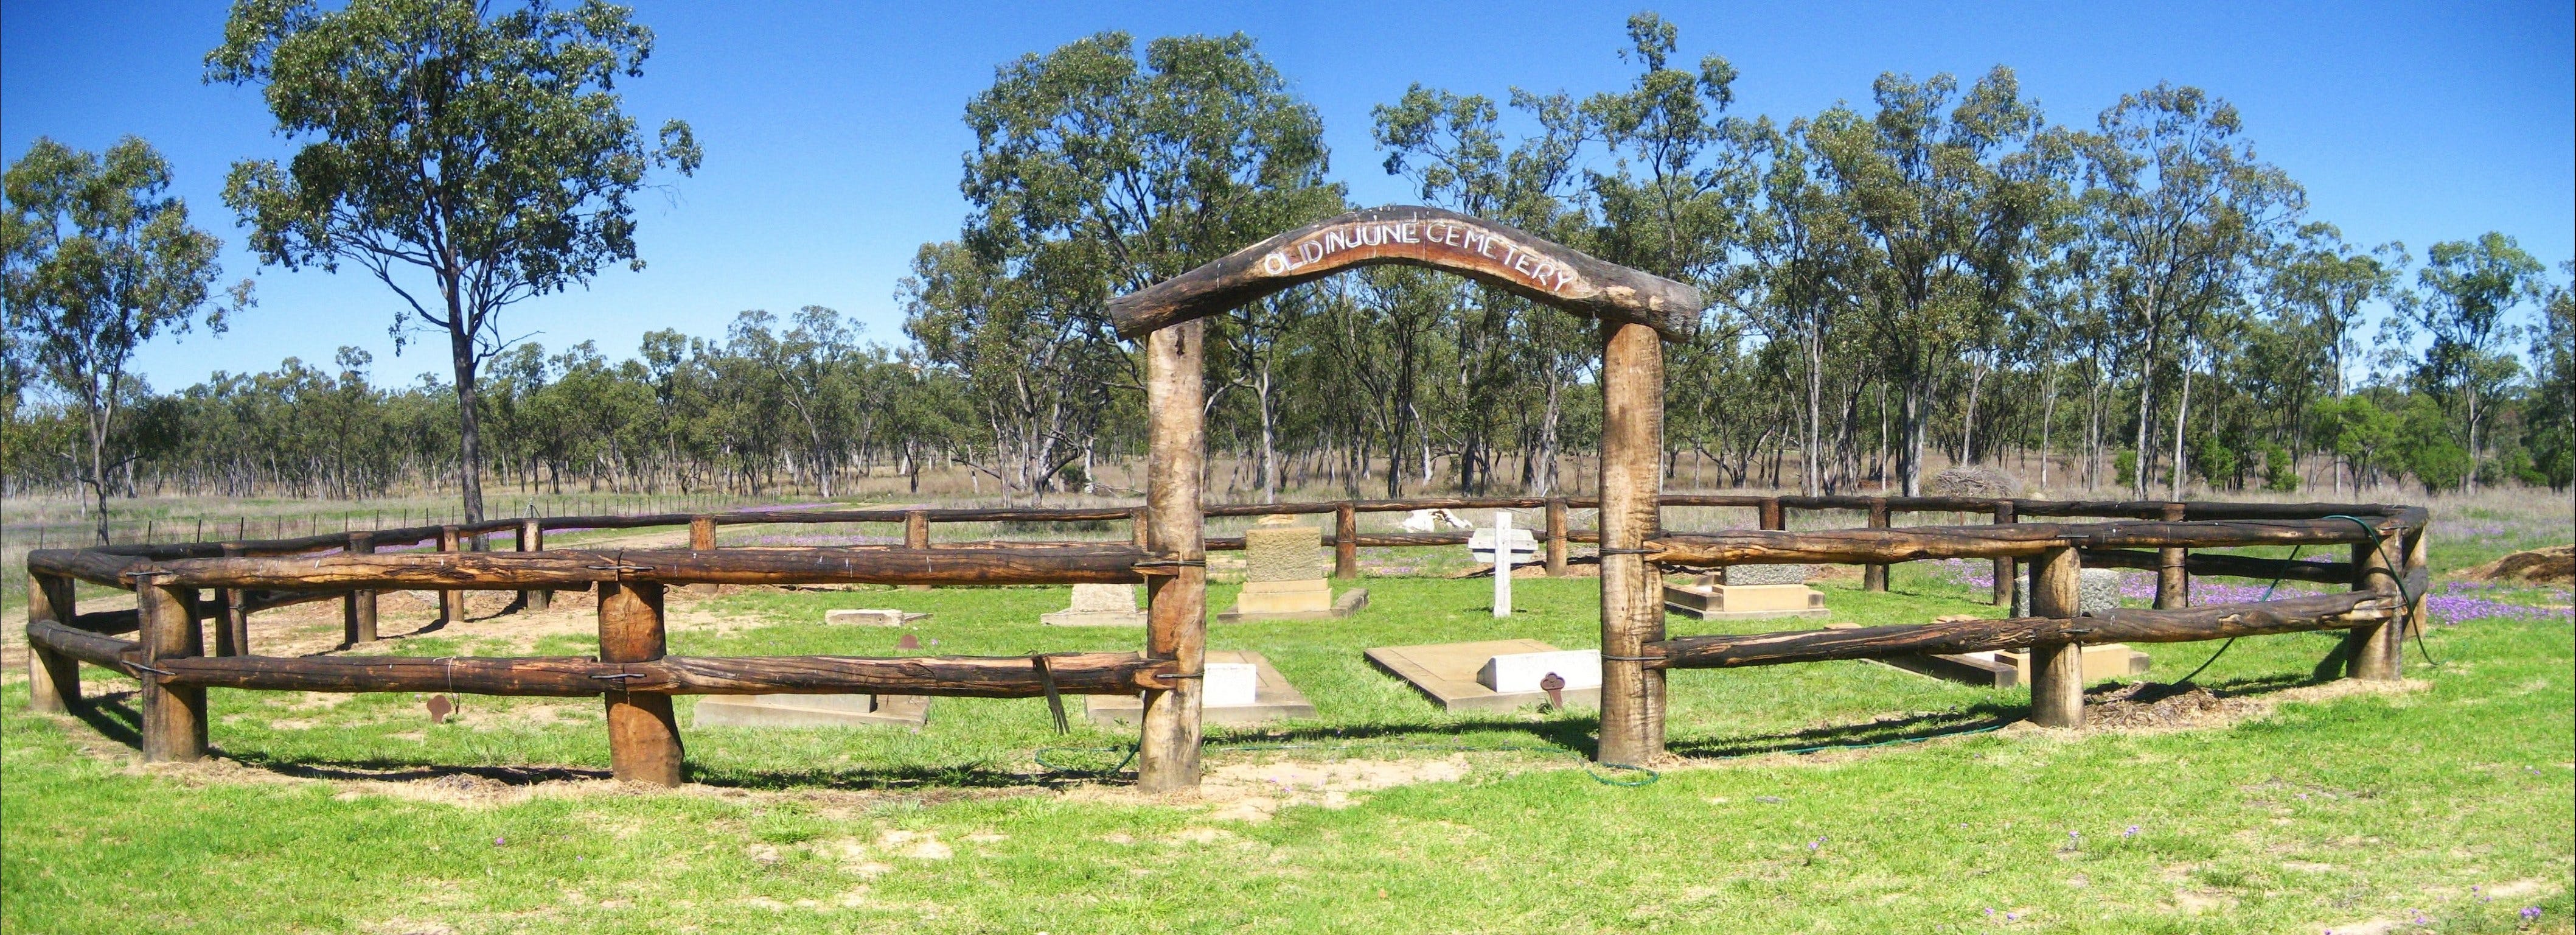 Old Injune Cemetery - Accommodation Bookings